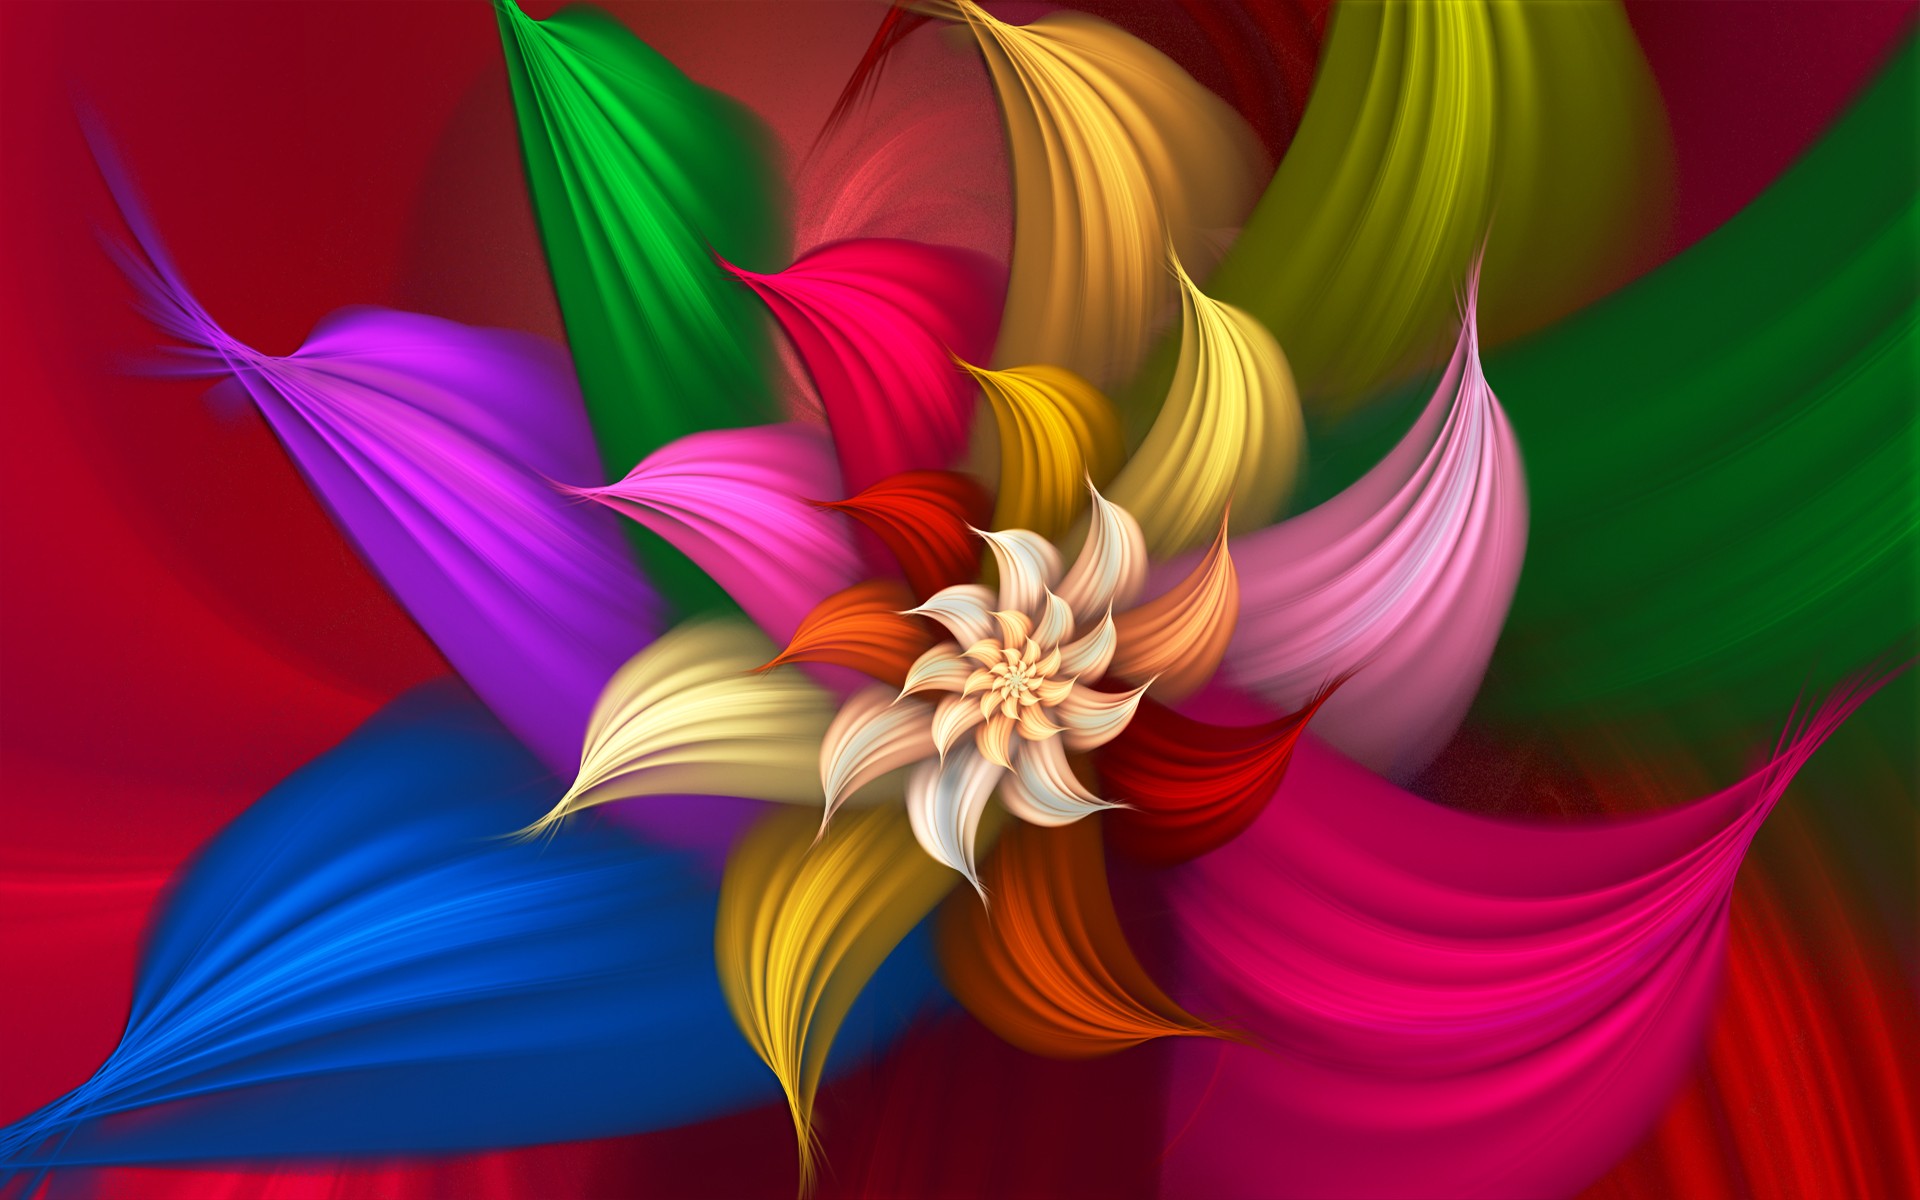 Free Download Colorful Abstract Flower Wide Wallpaper New Hd Wallpapers 1920x1200 For Your Desktop Mobile Tablet Explore 67 Colorful Flower Backgrounds Beautiful Colorful Flowers Wallpaper